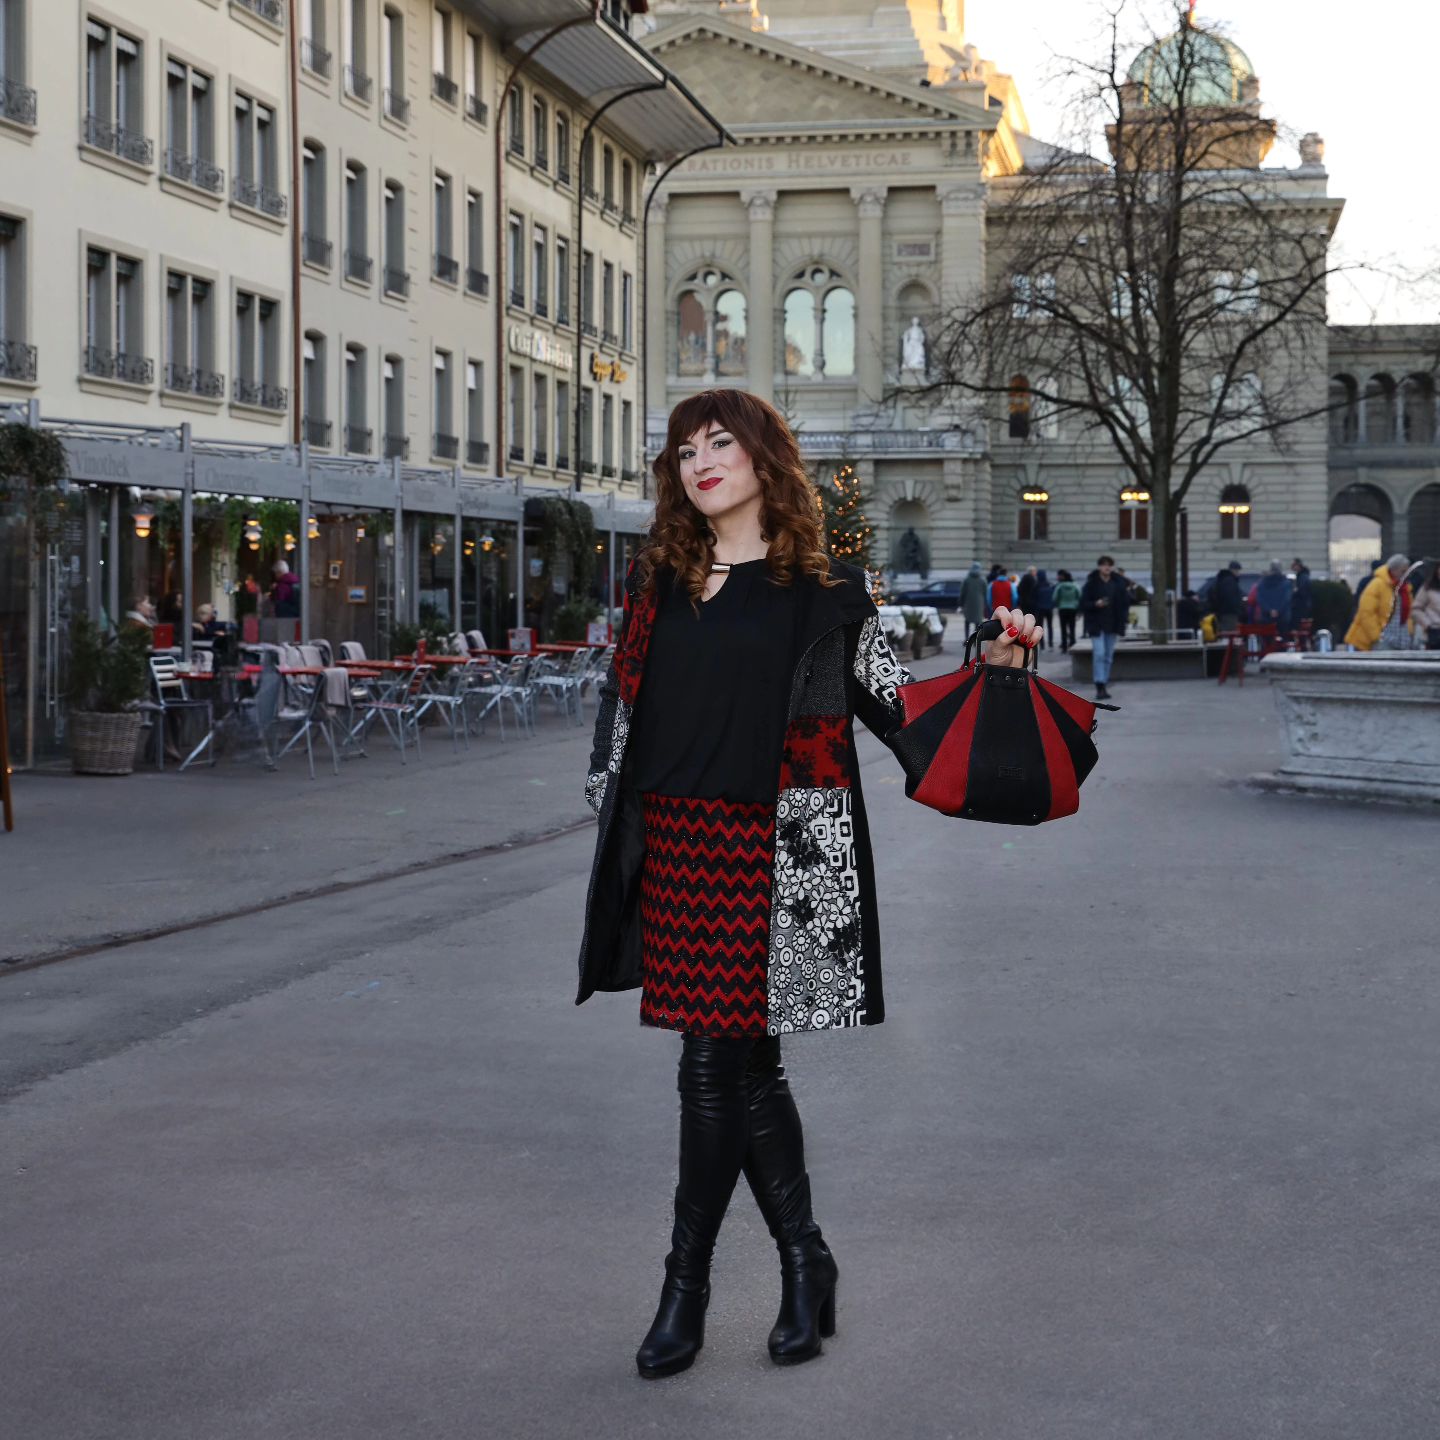 Out and about in Bern 

With @gloria_esch and @queer.room.ch 

#spring #bern #outandabout #crossdresser #crossdress #overknees #style #fashion #transmodel